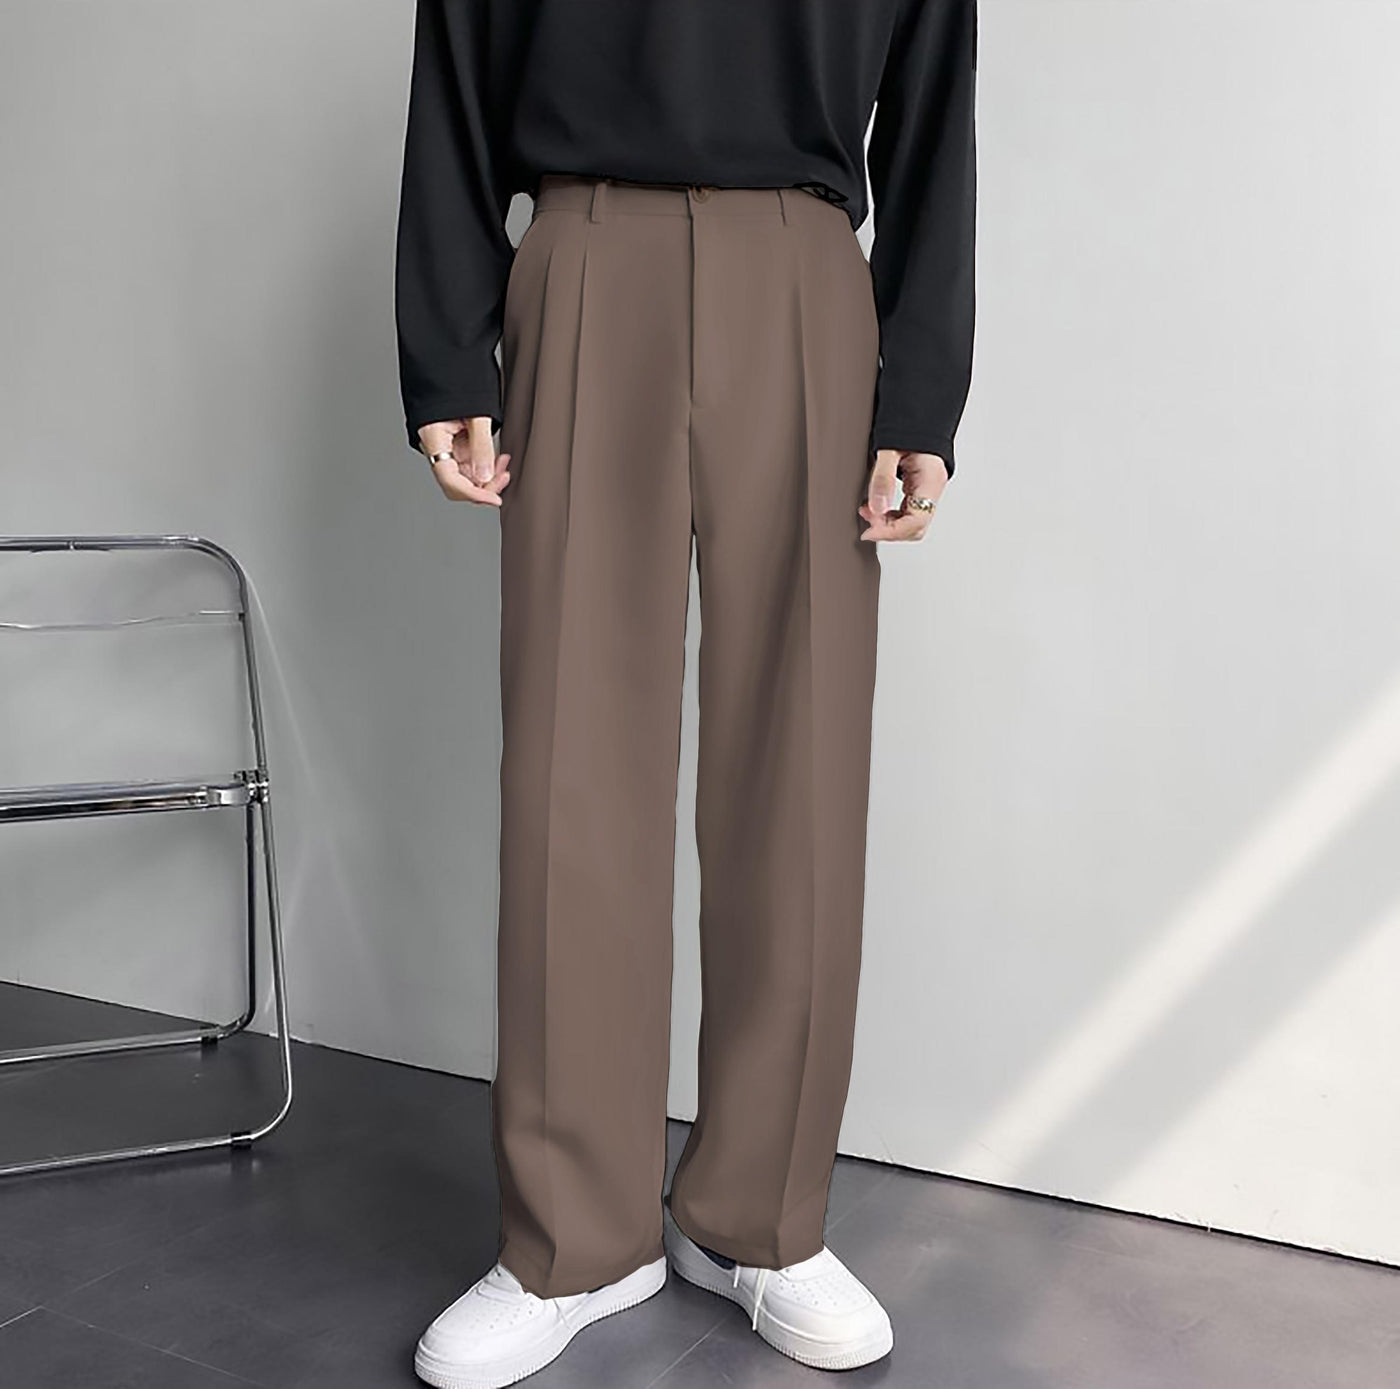 Loose Fit Trousers - Buy Loose Fit Trousers online in India